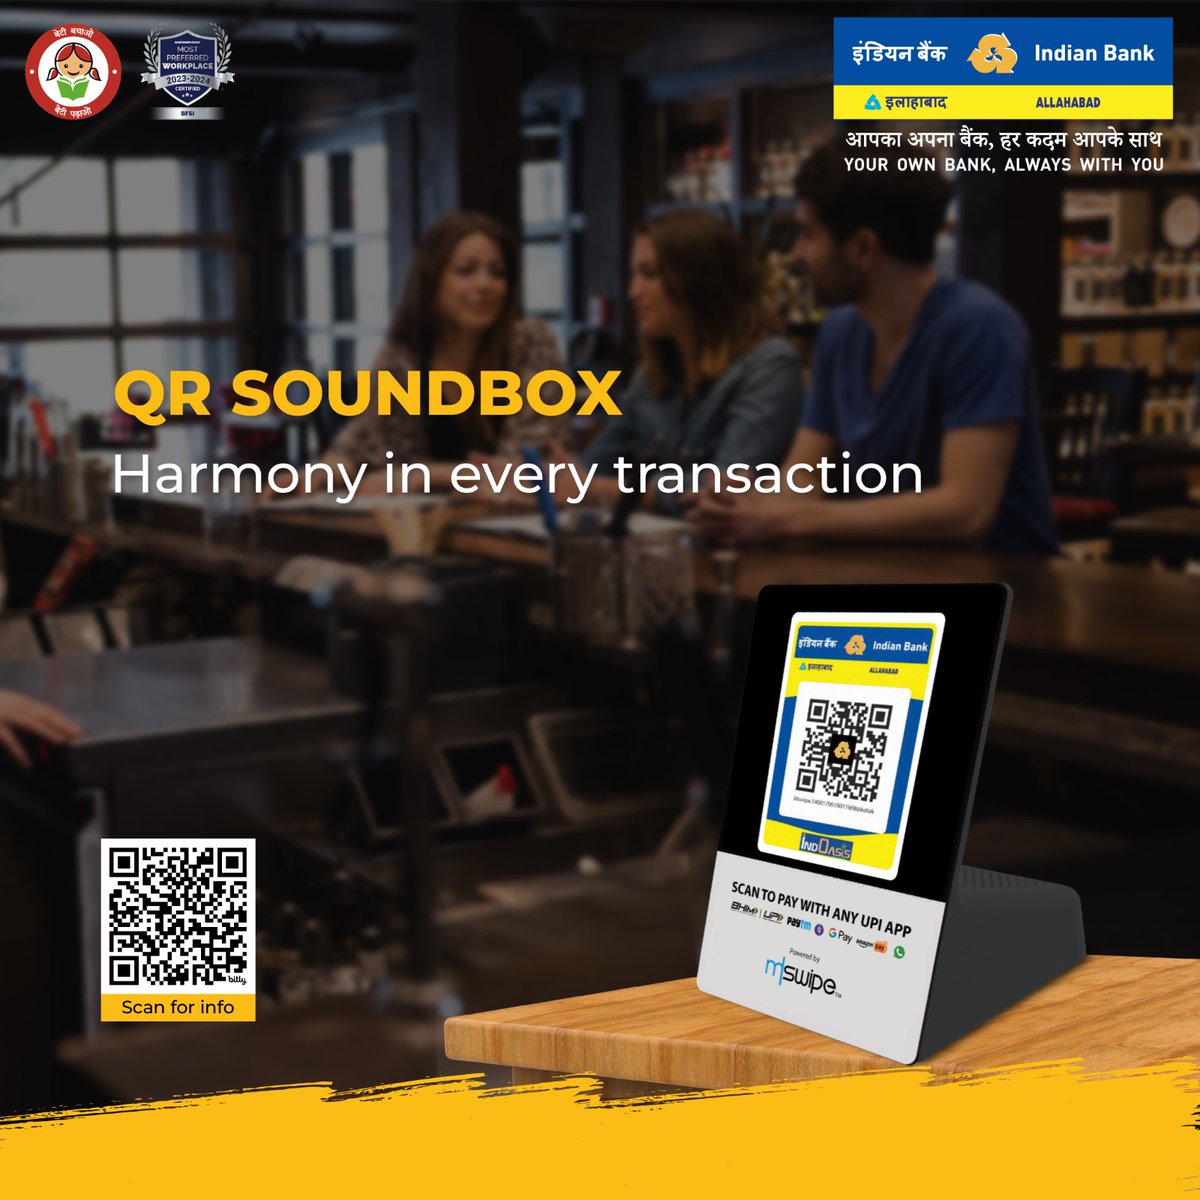 Make your customers' payment experience seamless and your business operations effortless with Indian Bank QR Soundbox.
Know More : bit.ly/IB_QRSoundBox
#IndianBank 
@DFS_India